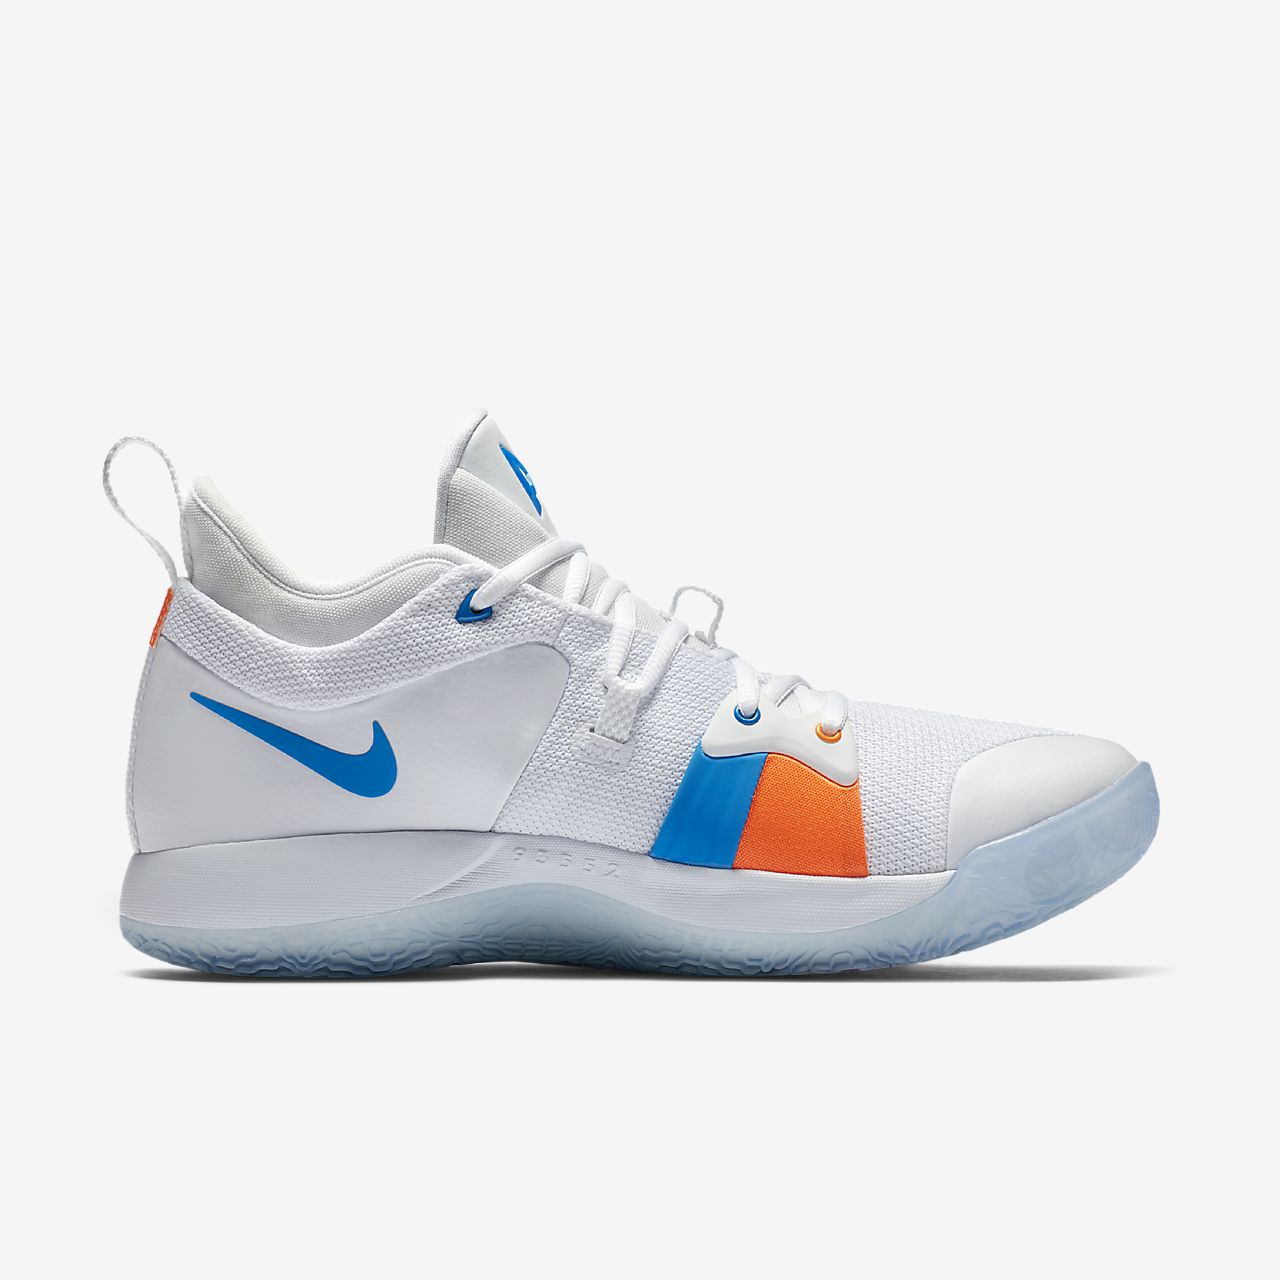 pg 13 shoes 2 Kevin Durant shoes on sale